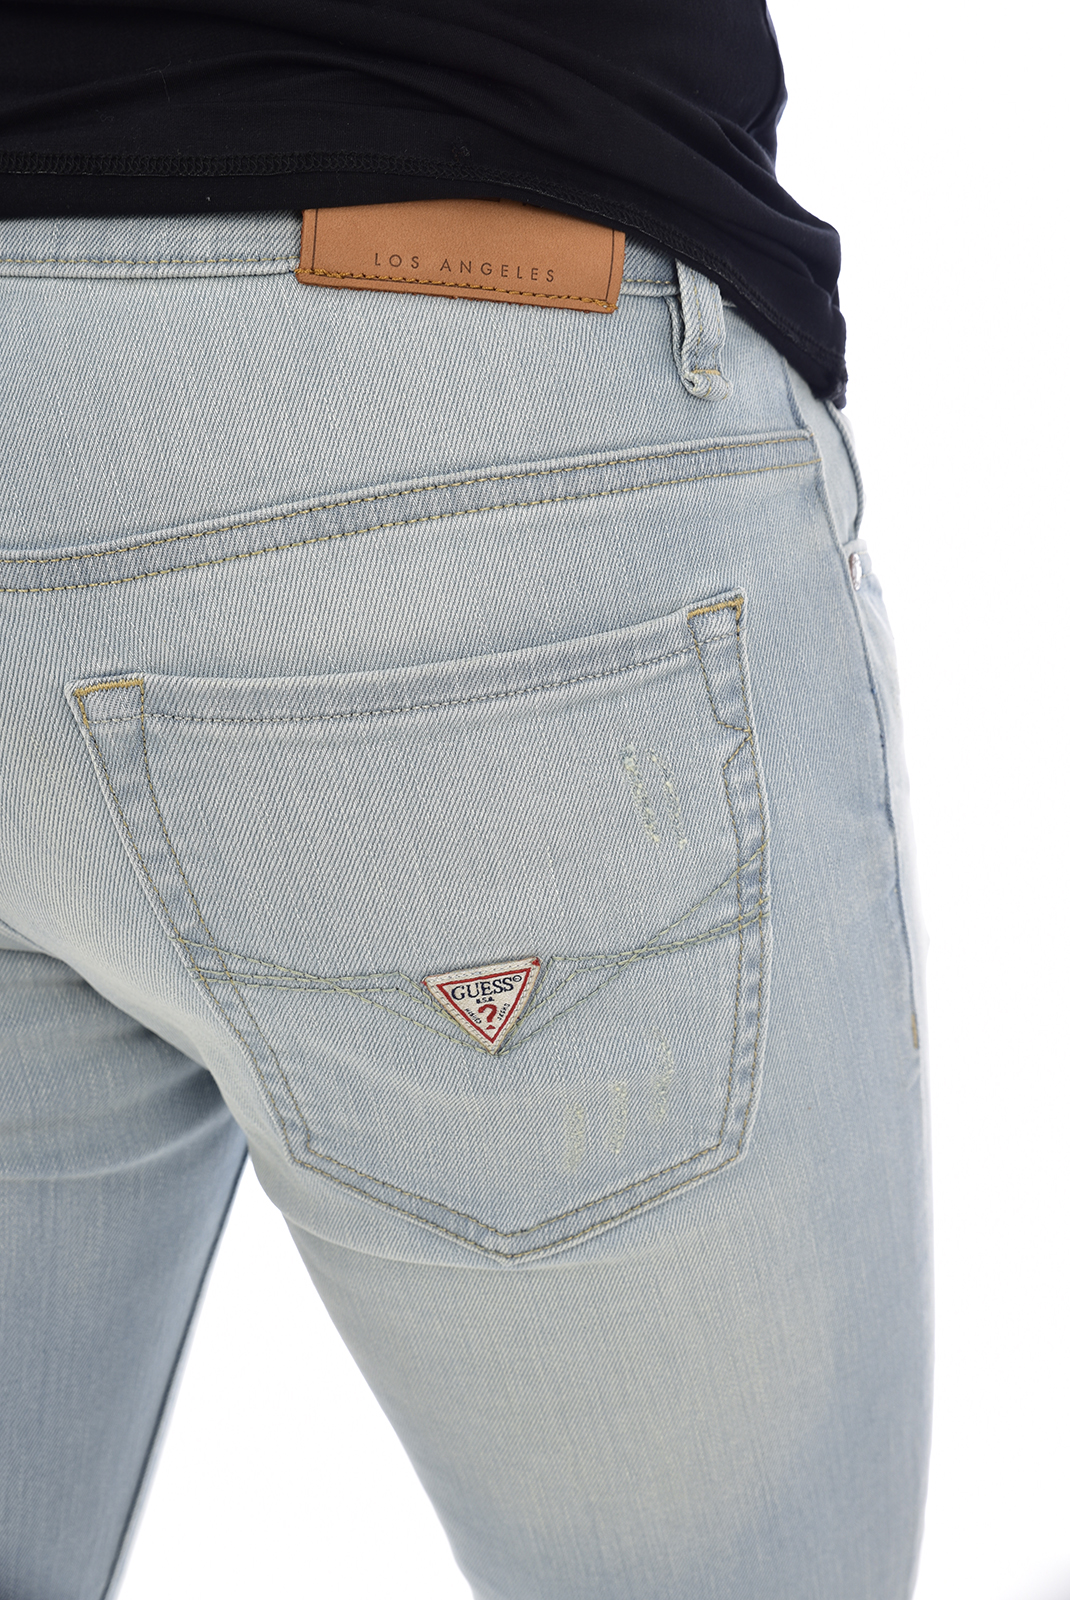 Guess Jeans Bleu Skinny Taille Basse M92an2 Angels 